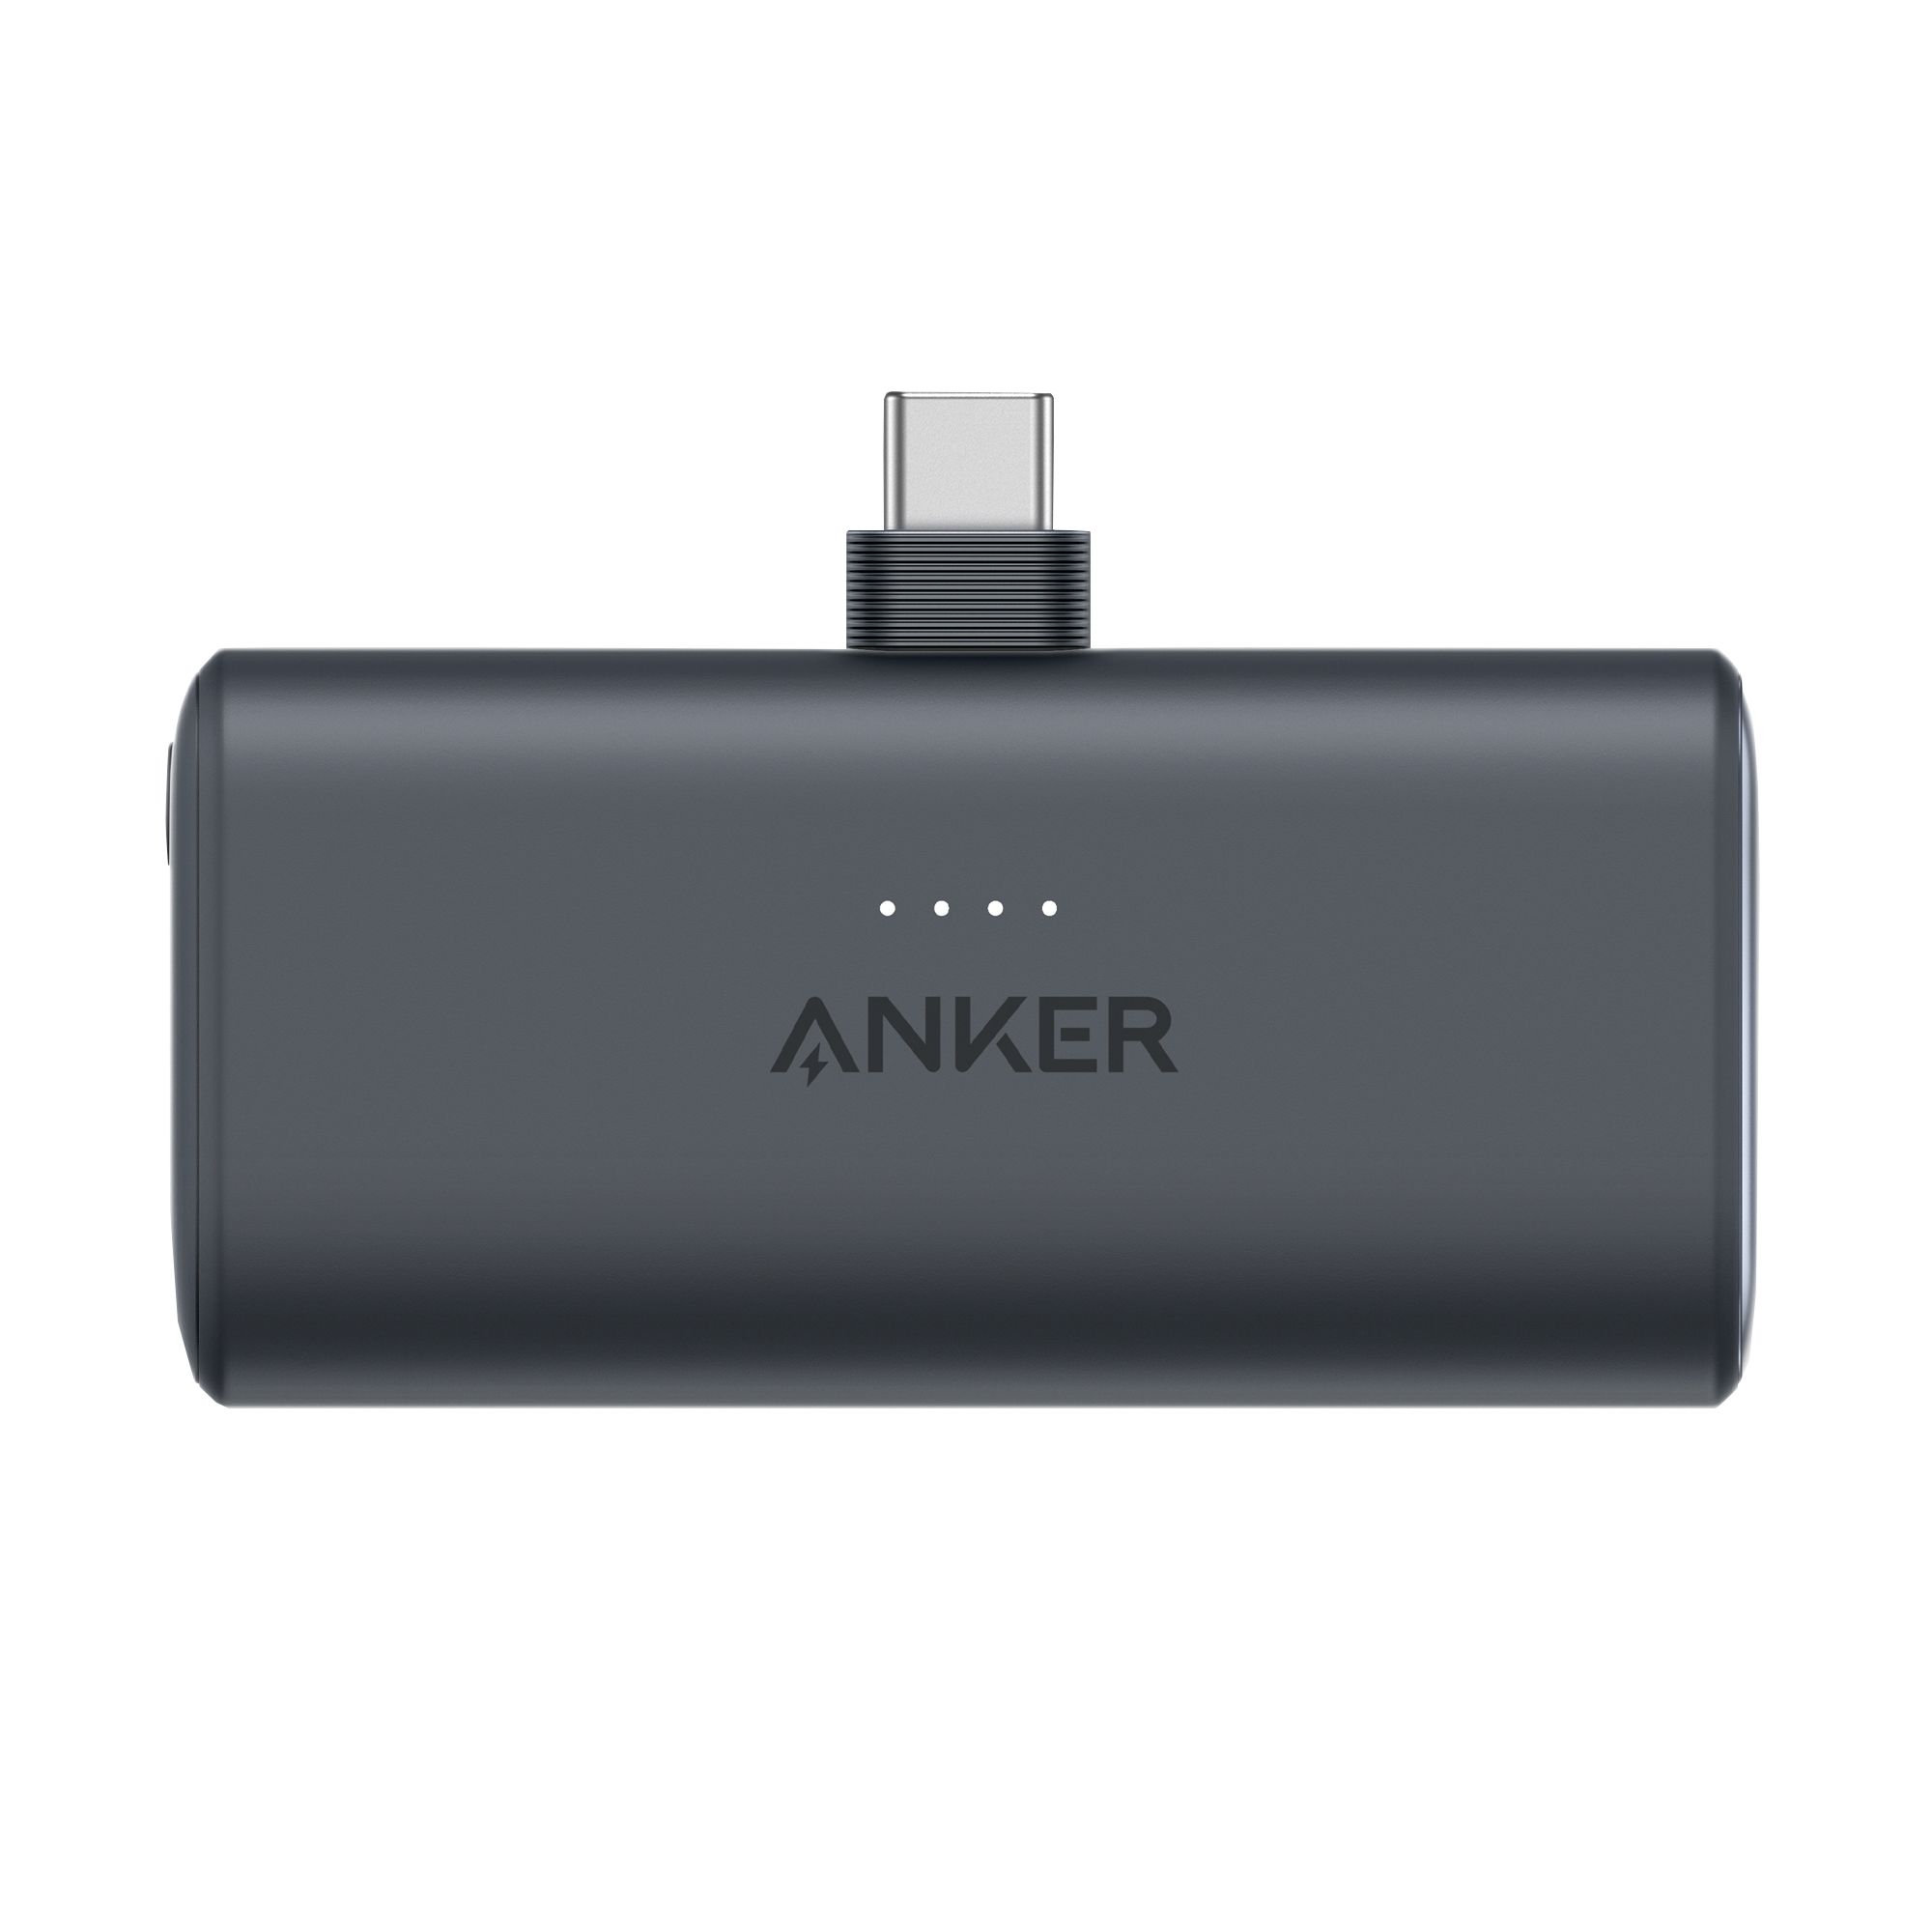 Anker MagGo 5,000mAh Mobile Batteries with Stand